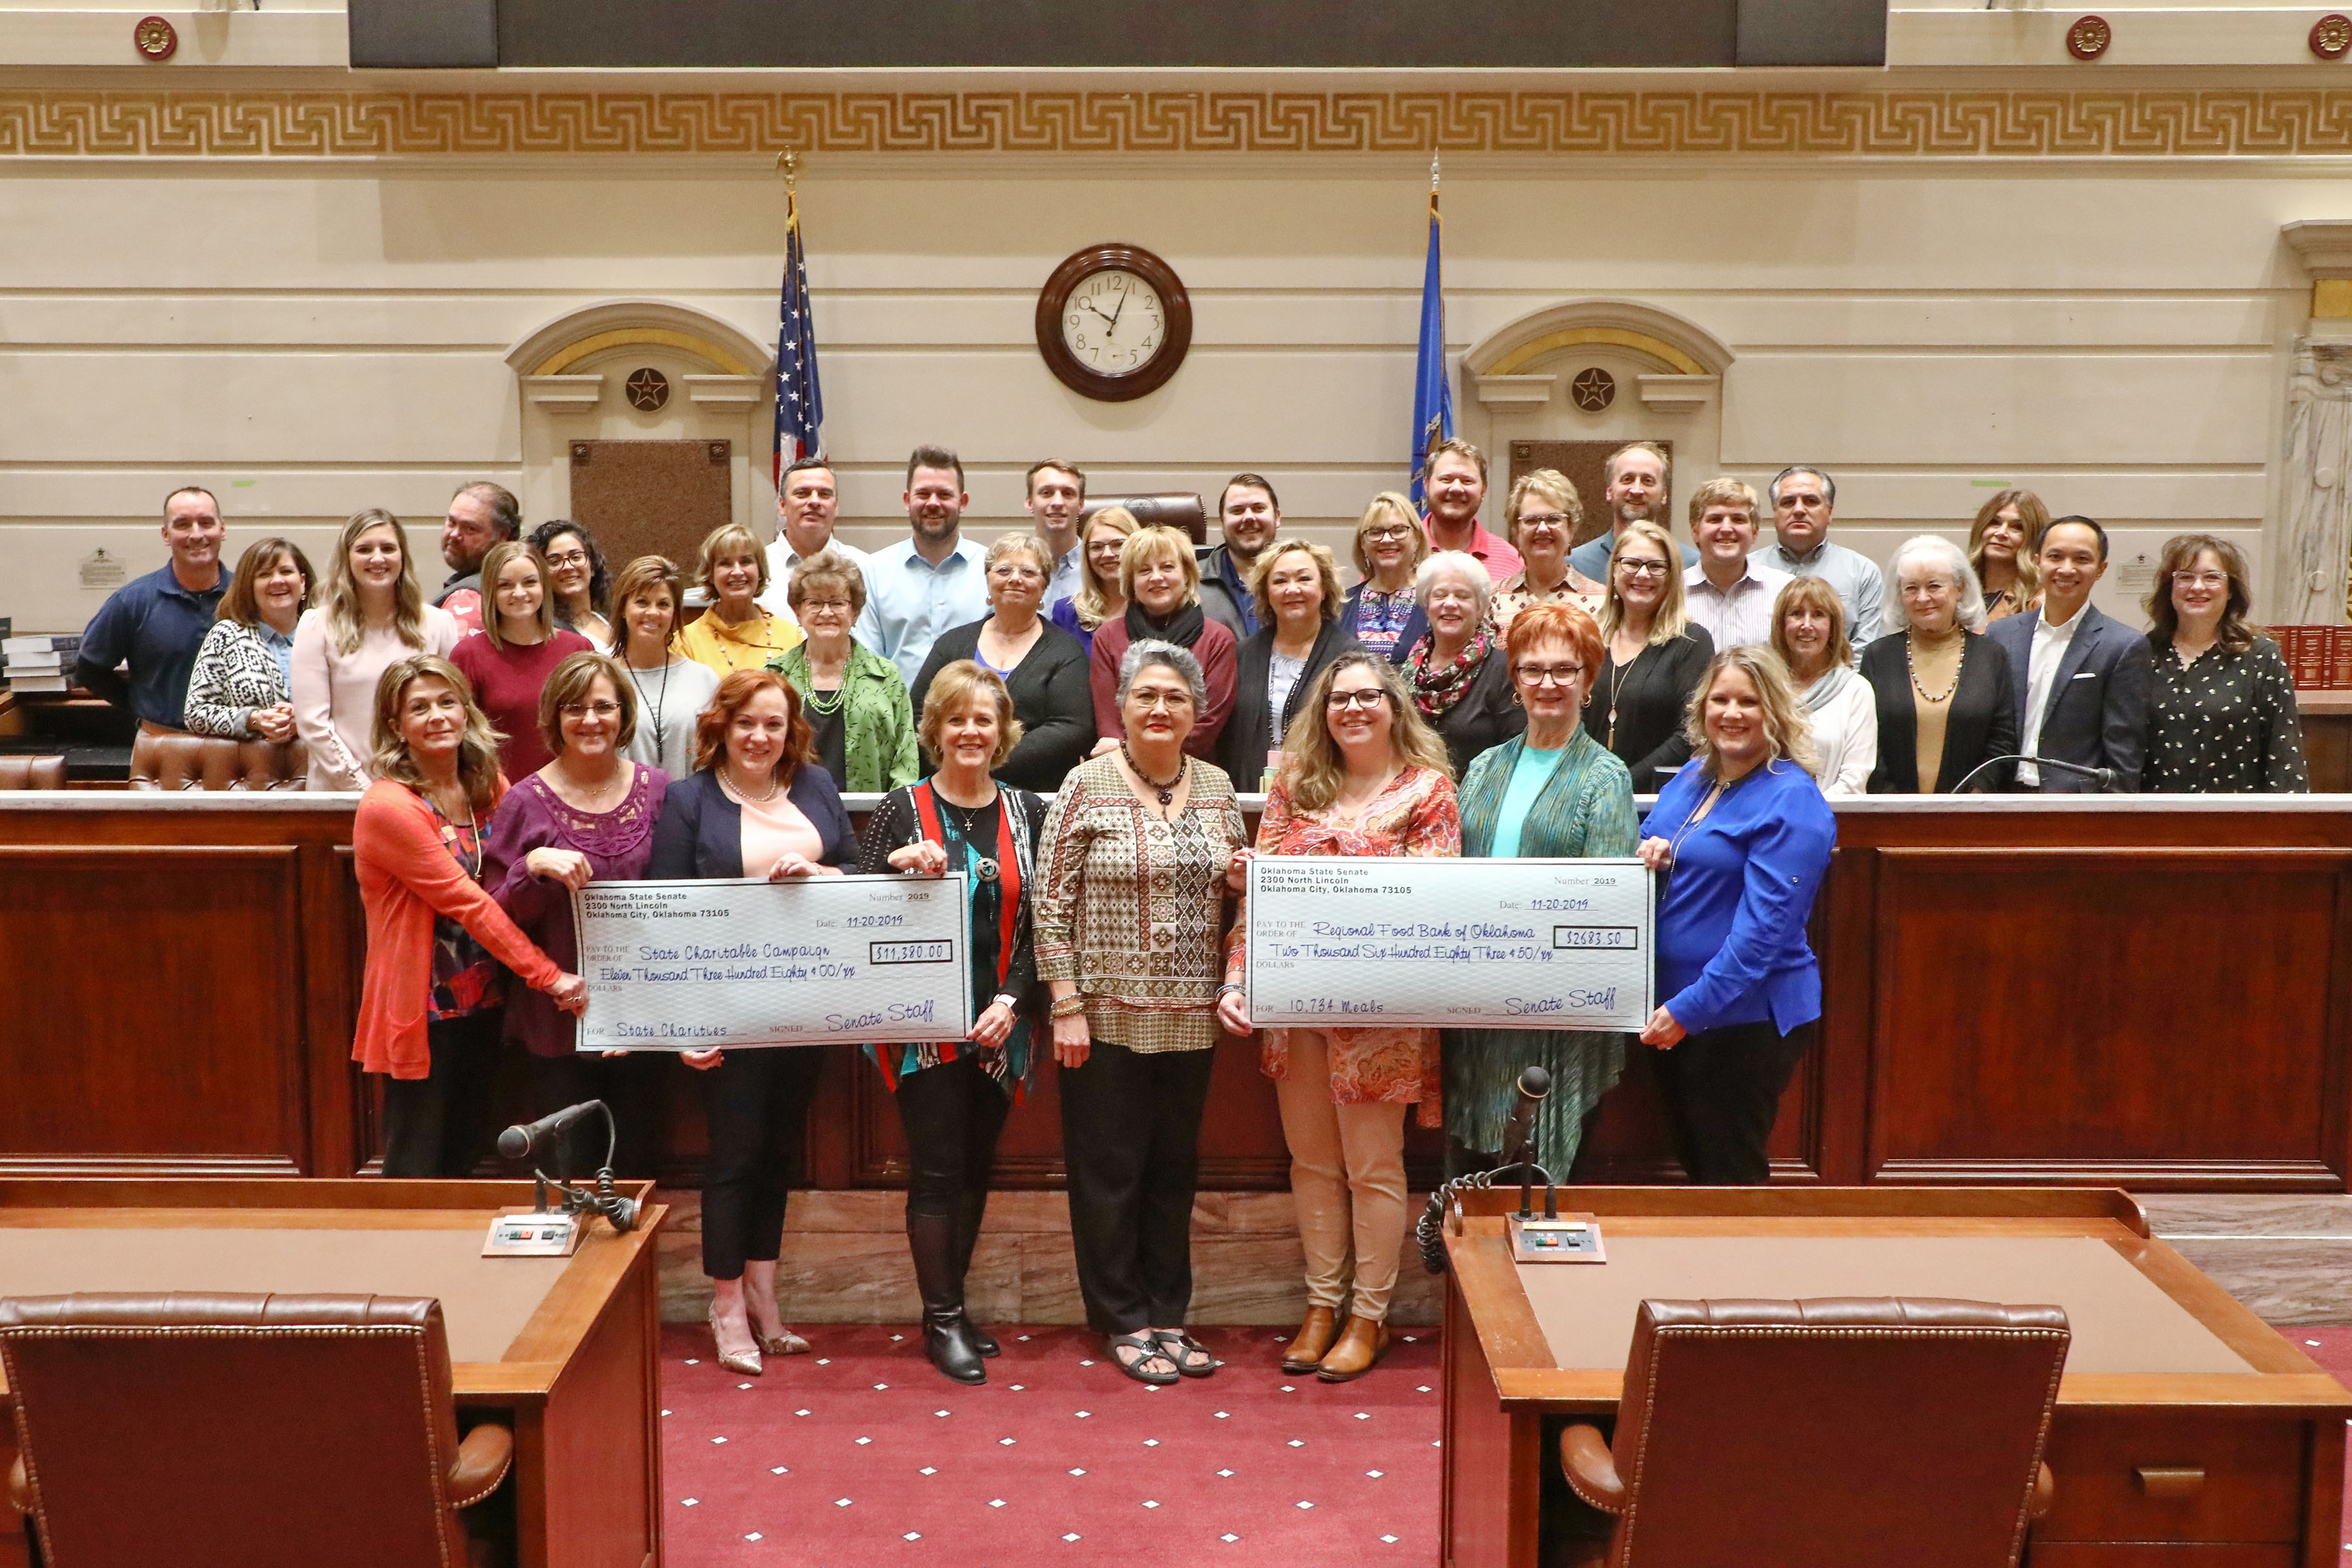 The state Senate recently wrapped up their State Charitable Campaign (SCC) raising more than $14,000 for Oklahoma charities.